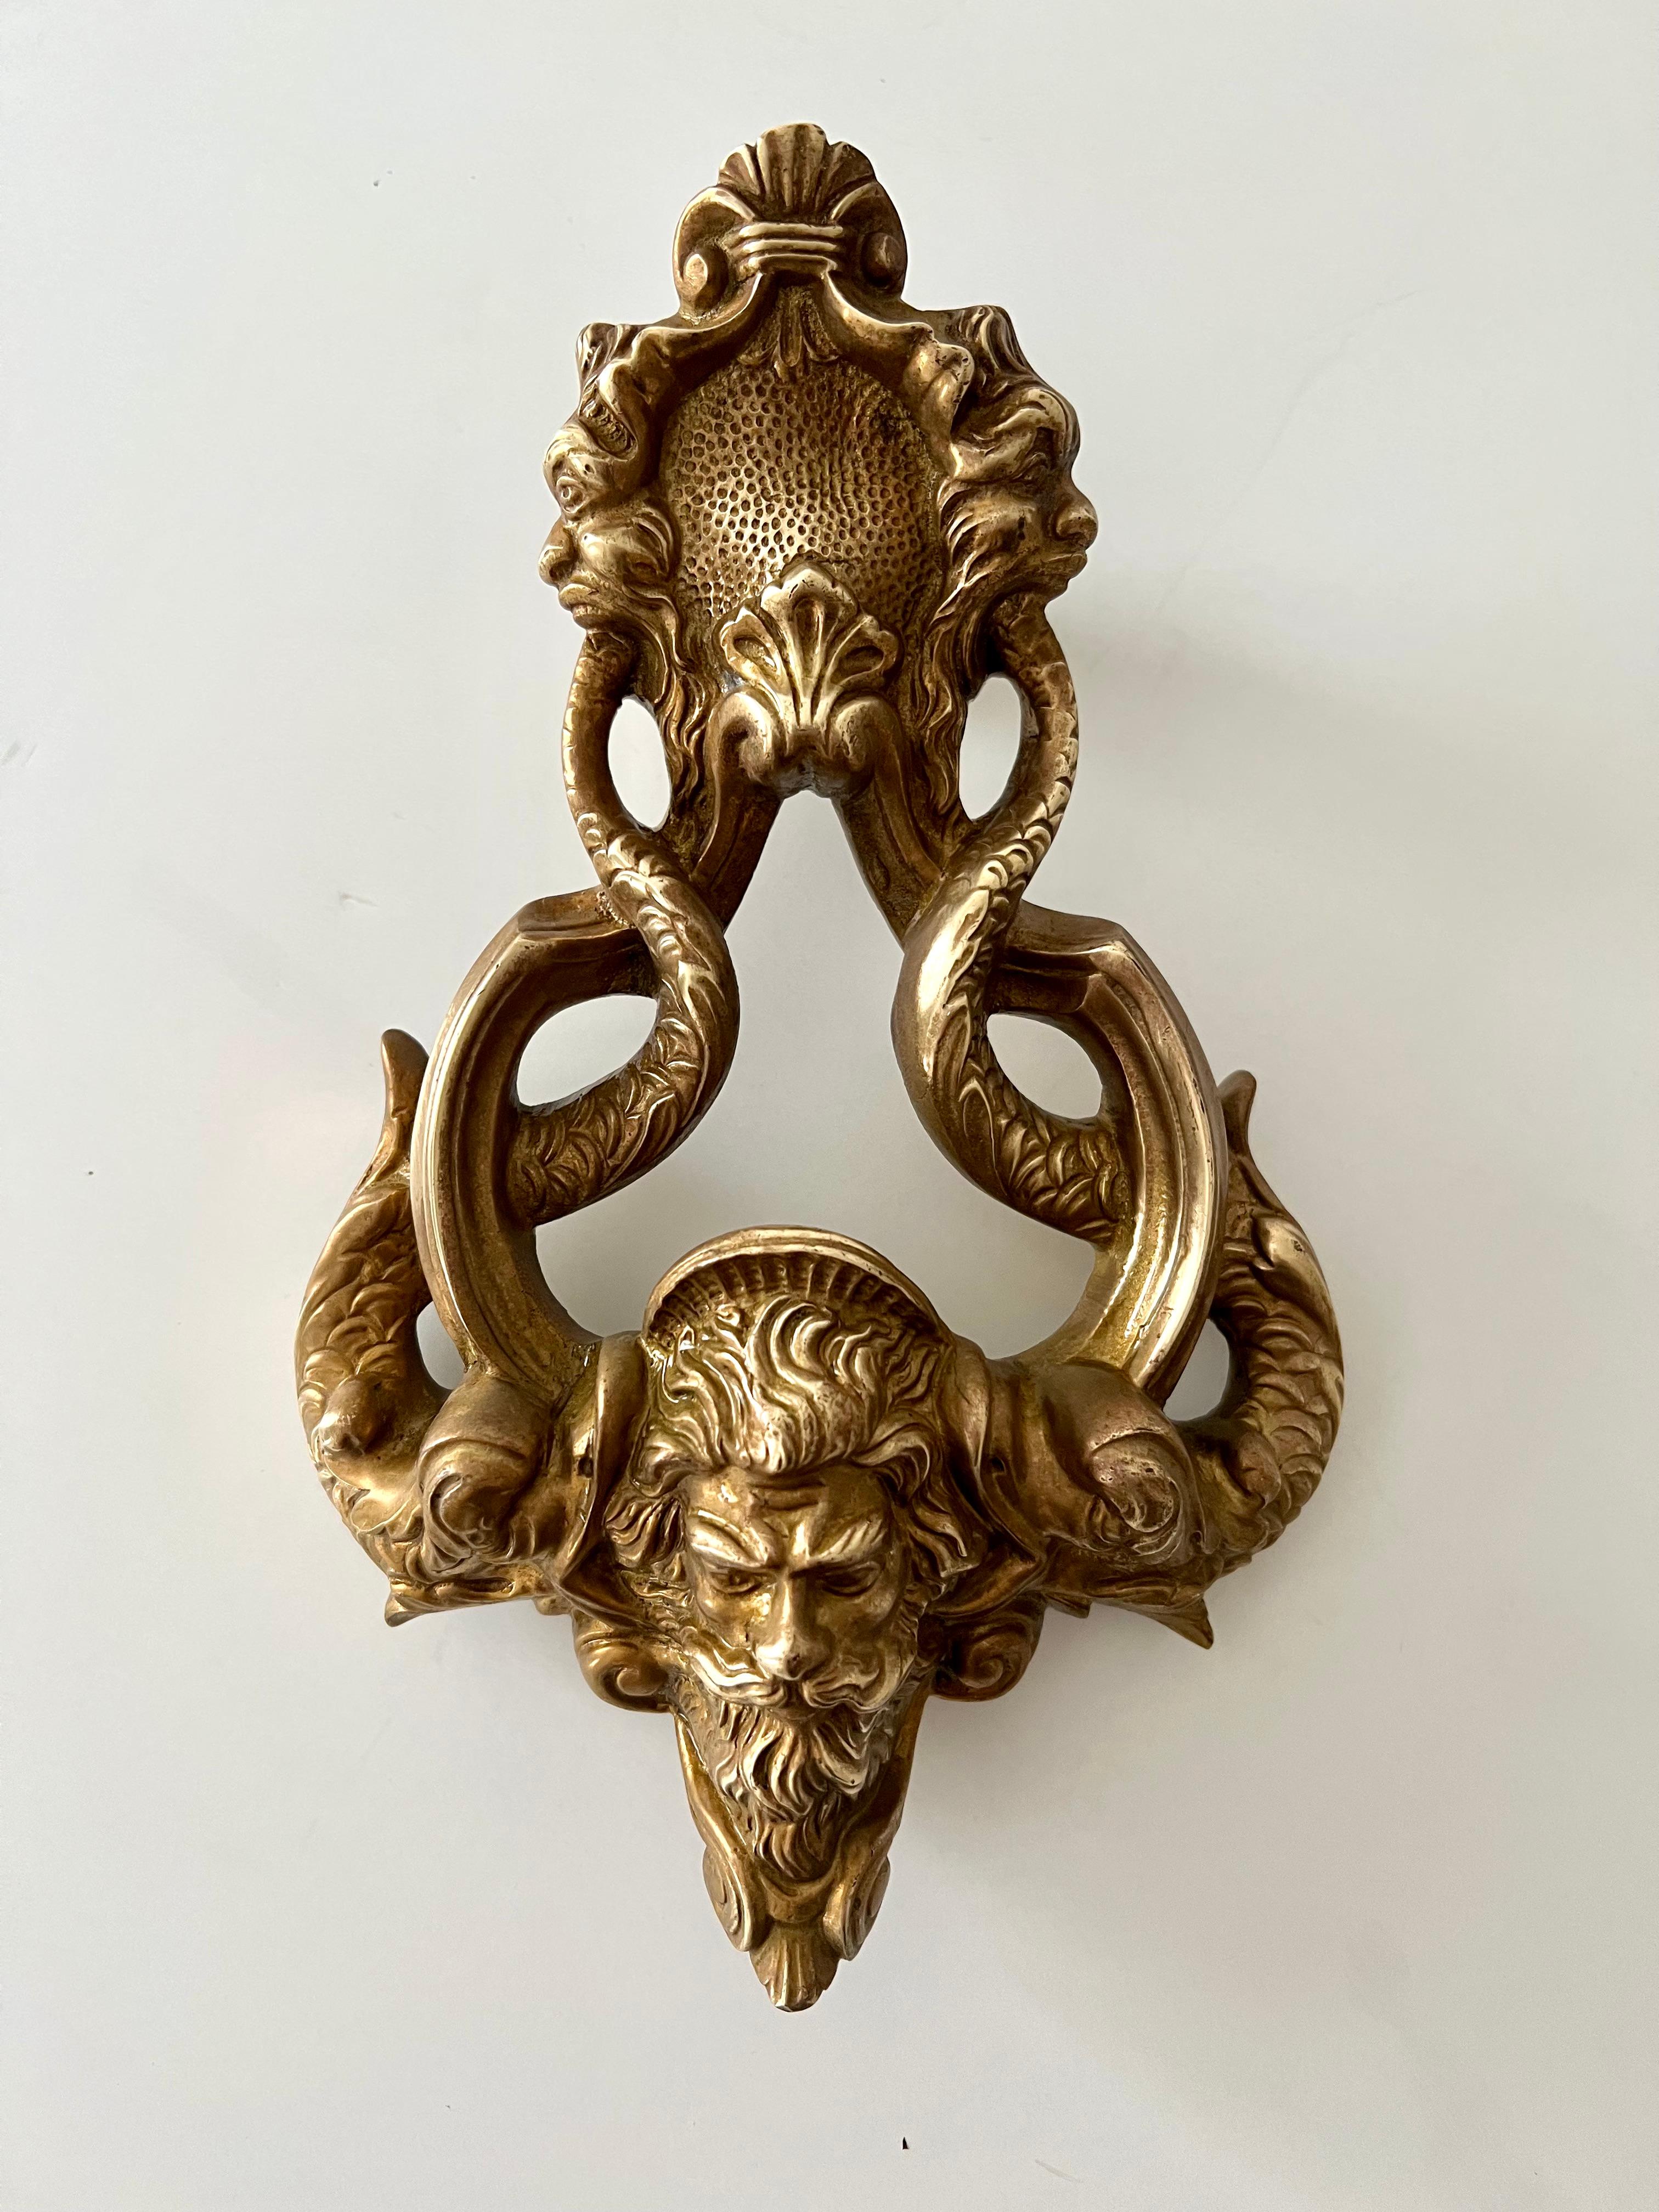 A wonderfully intricate Door knocker of solid brass. The piece is very detailed with faces and focal point of Zeus surrounded by Curved Dolphins - definitely a statement for your guests upon arrival - 

As the chief Greek deity, Zeus is considered